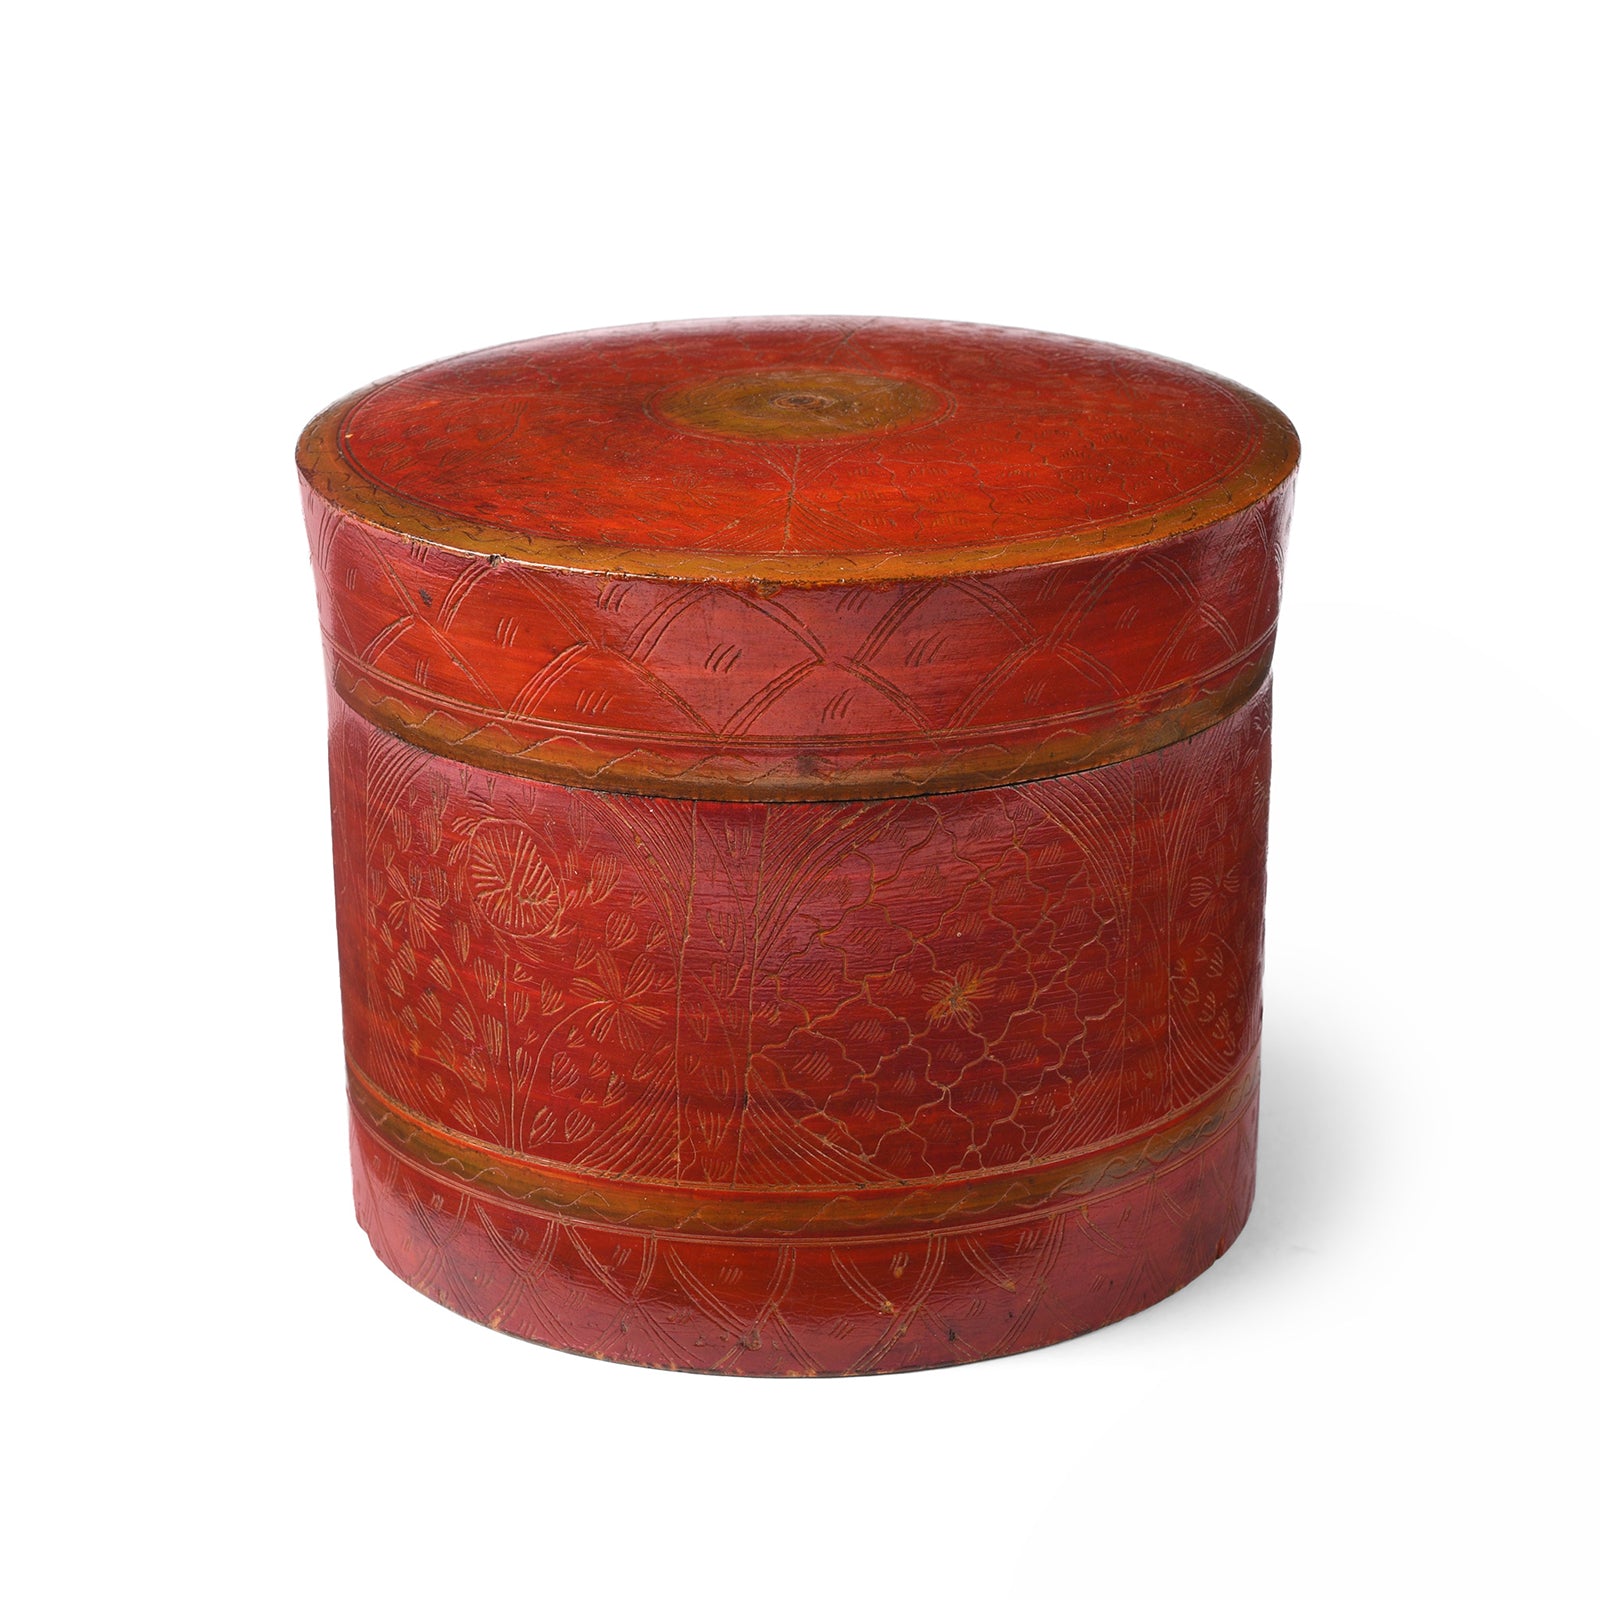 Old Regency Style Red Lacquer Pot From Rajasthan | Indigo Antiques